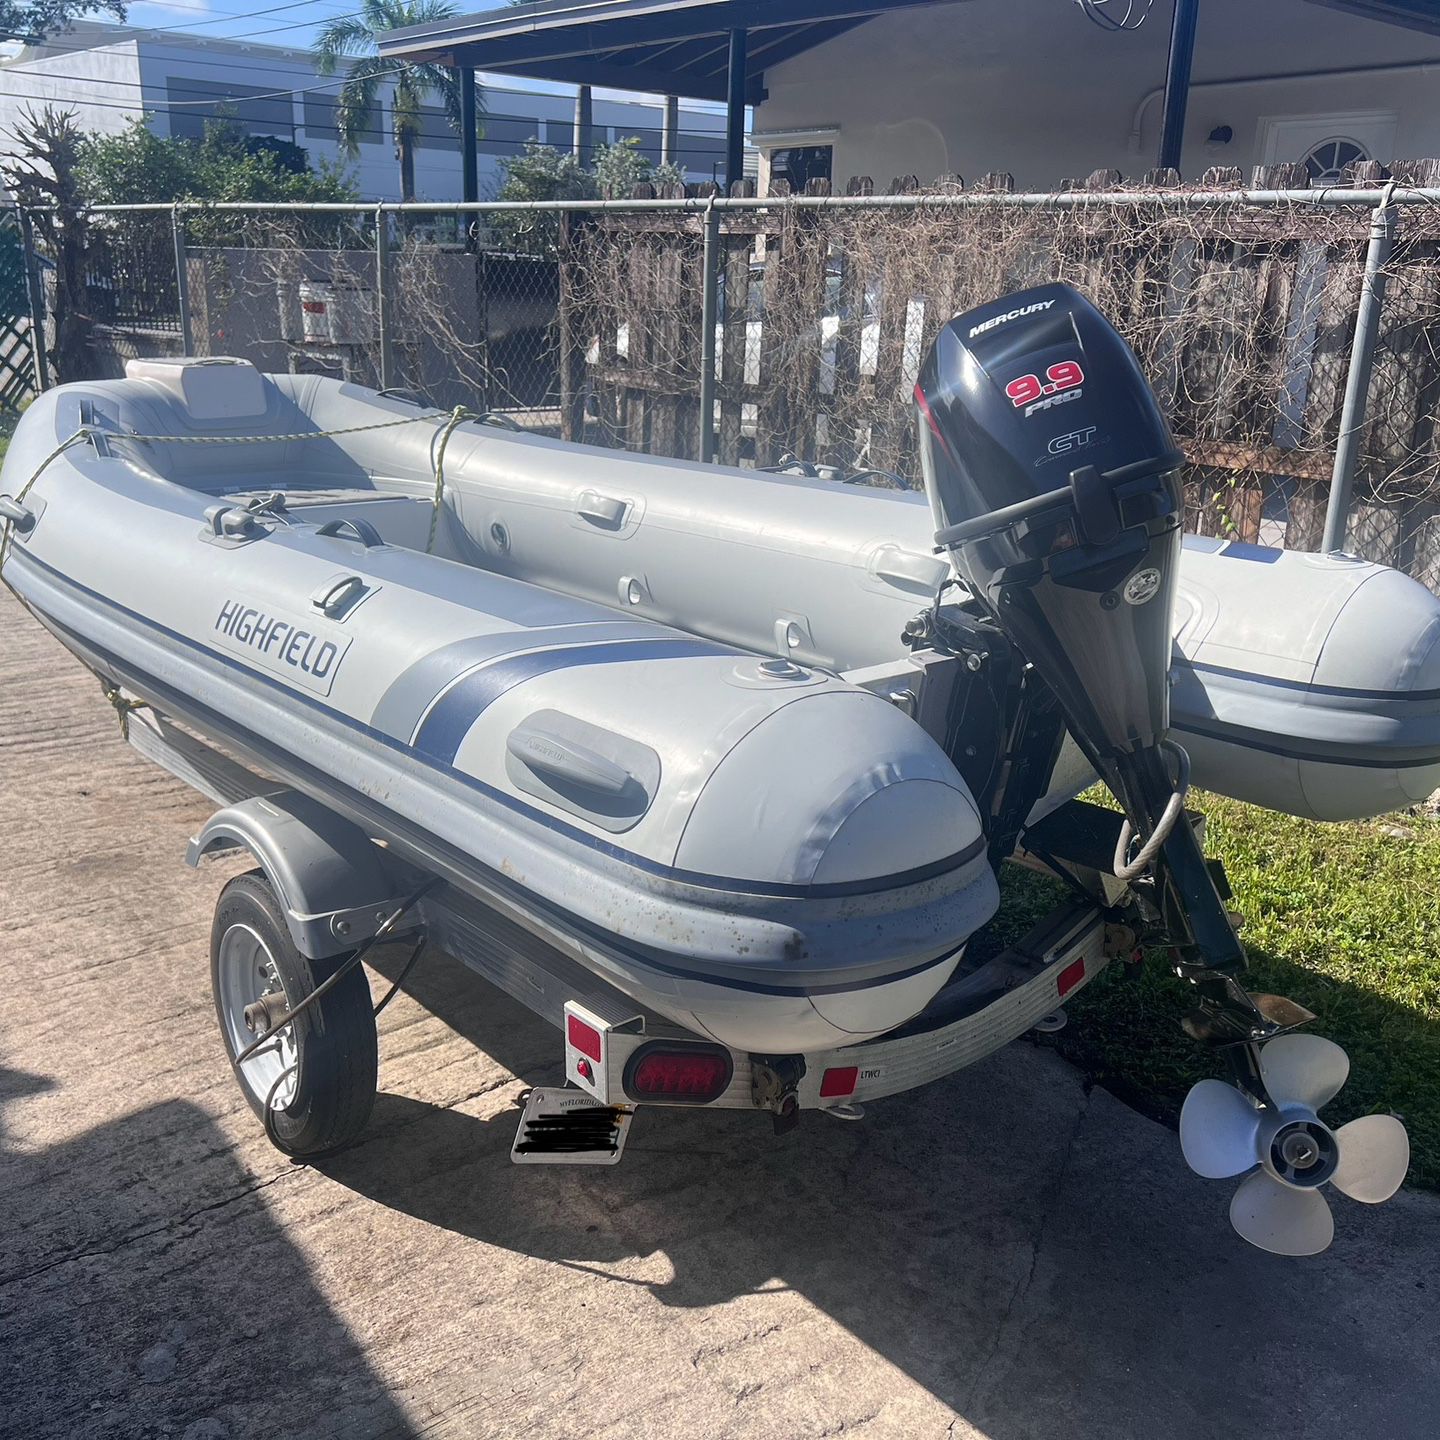 Highfield CL Inflatable boat